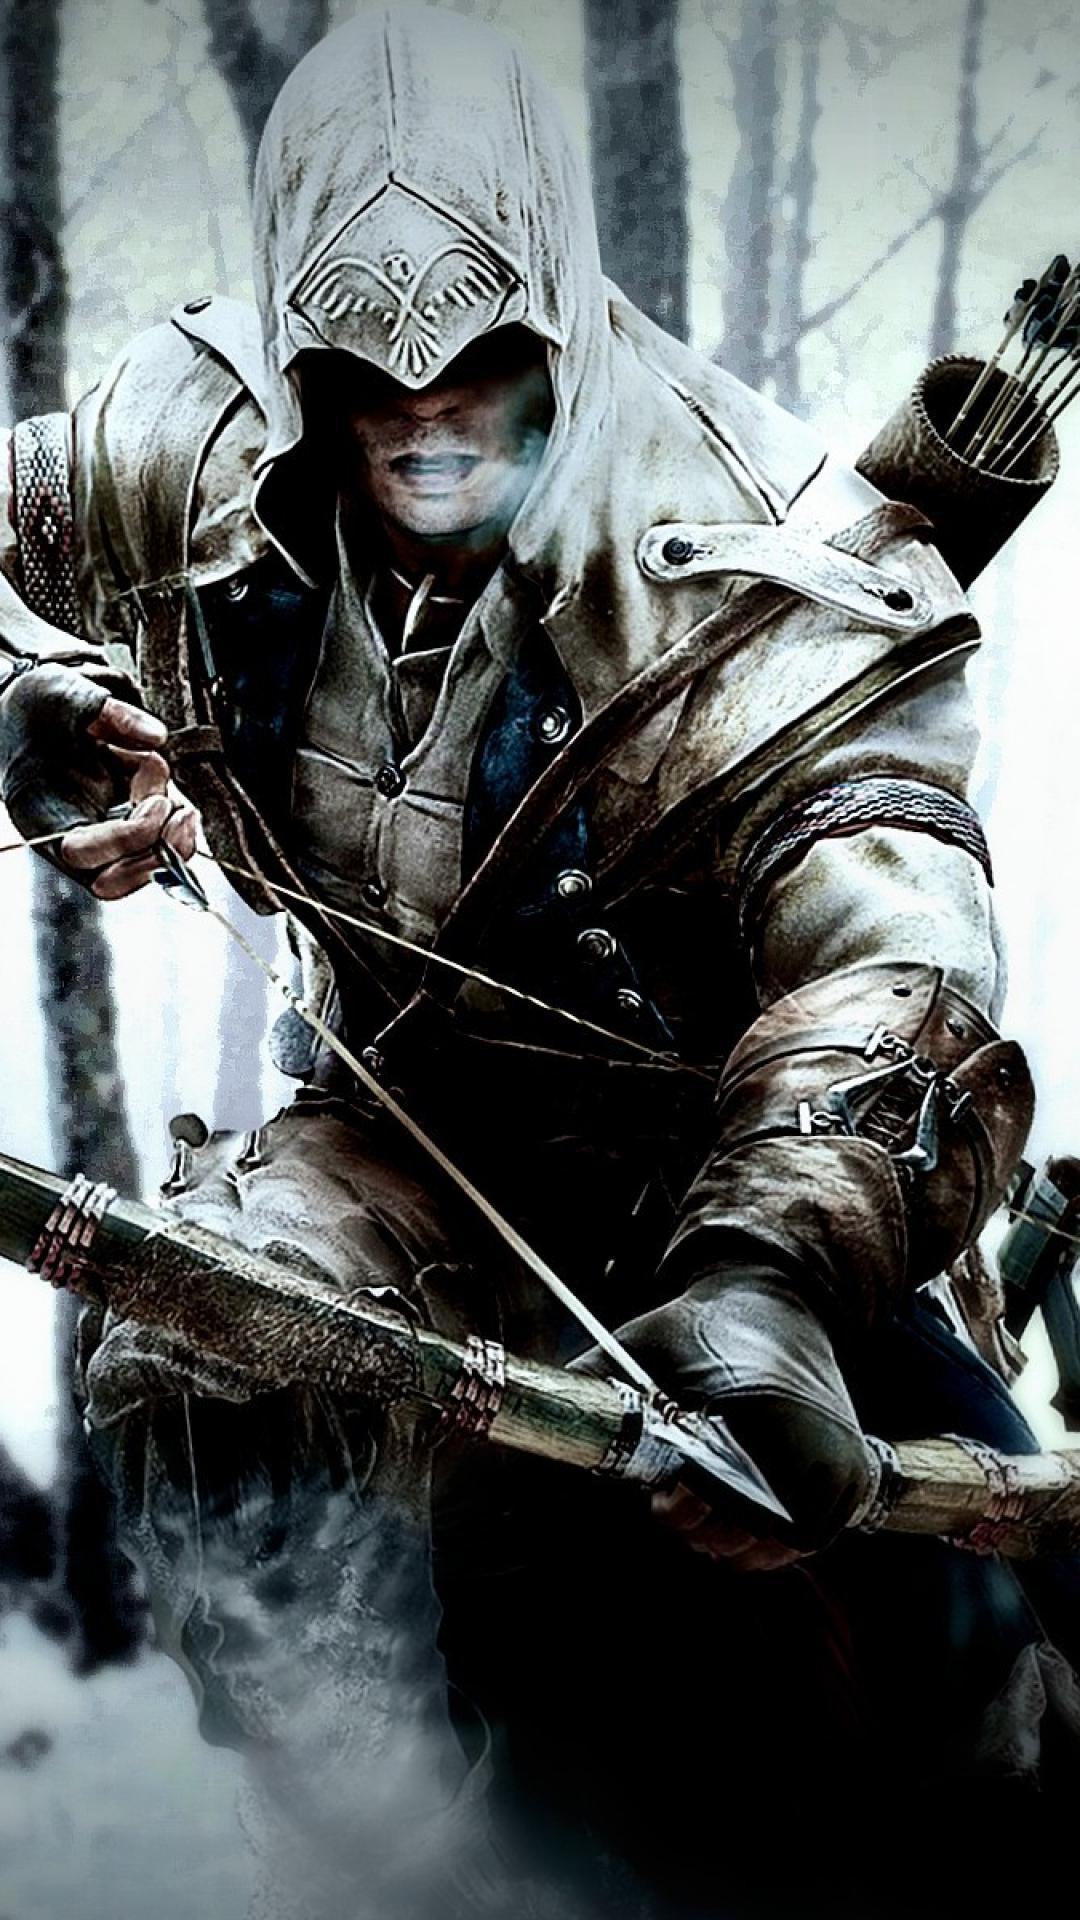 Download Connor Kenway Wallpaper, HD Backgrounds Download